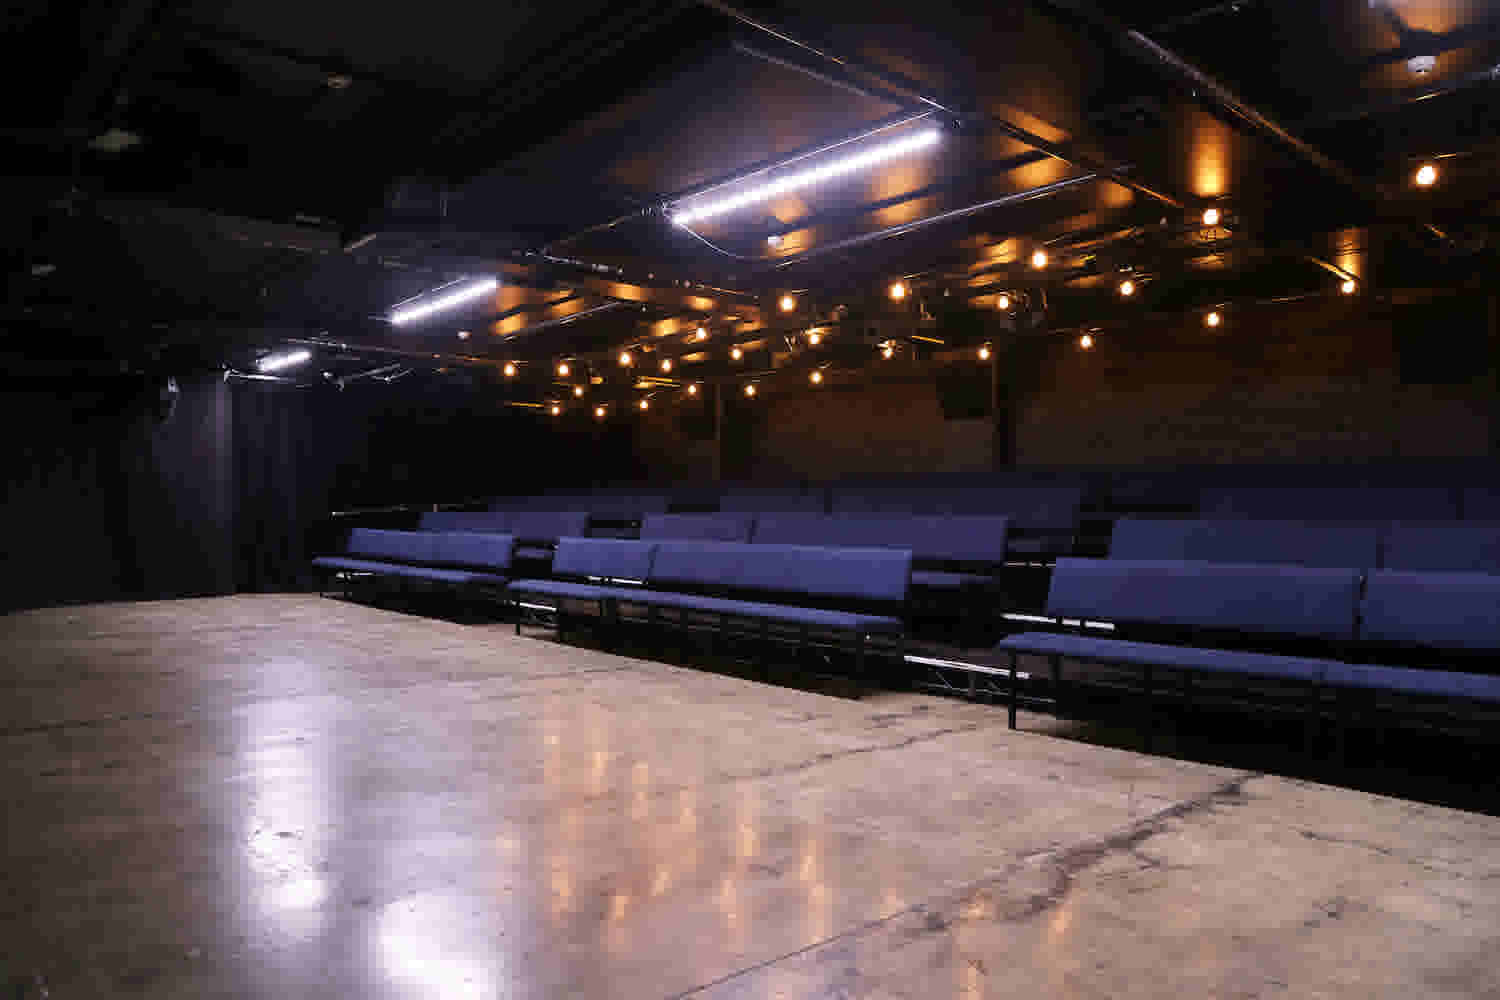 Basement Theatre's main Theatre space showing the stage and seating block as you come in the main entrance. 